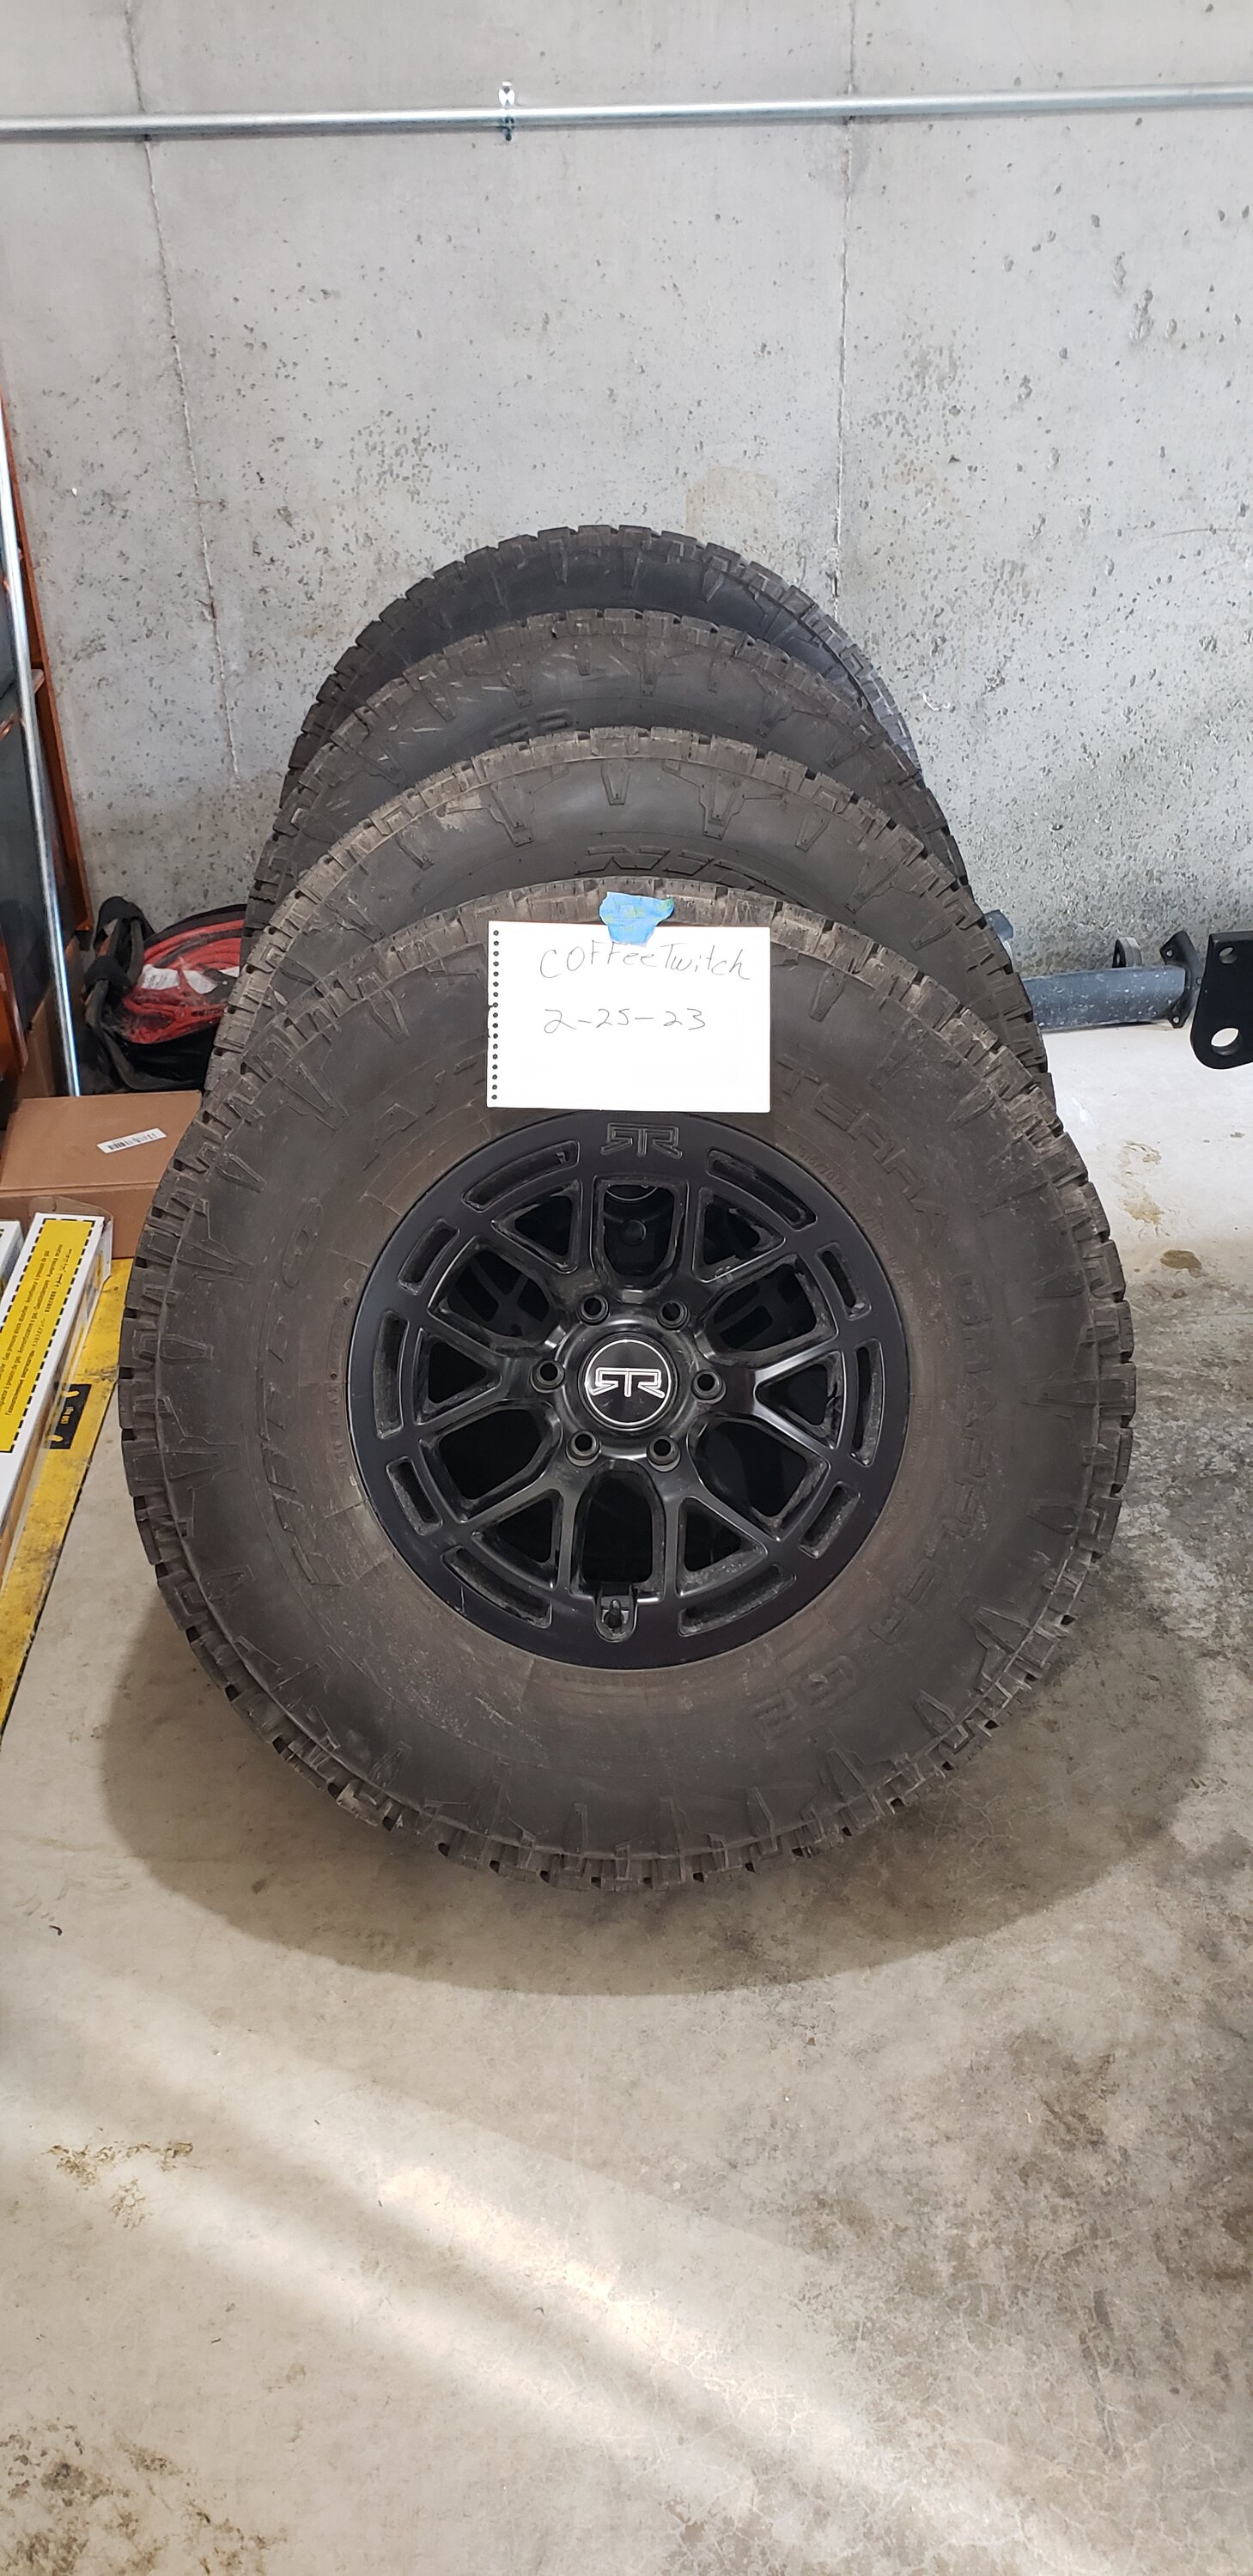 Ford Bronco 500$ OBO (4) rtr black 17x9 +30 with nitto terra grappler g2 and set of 5 method wheels 20230225_154939